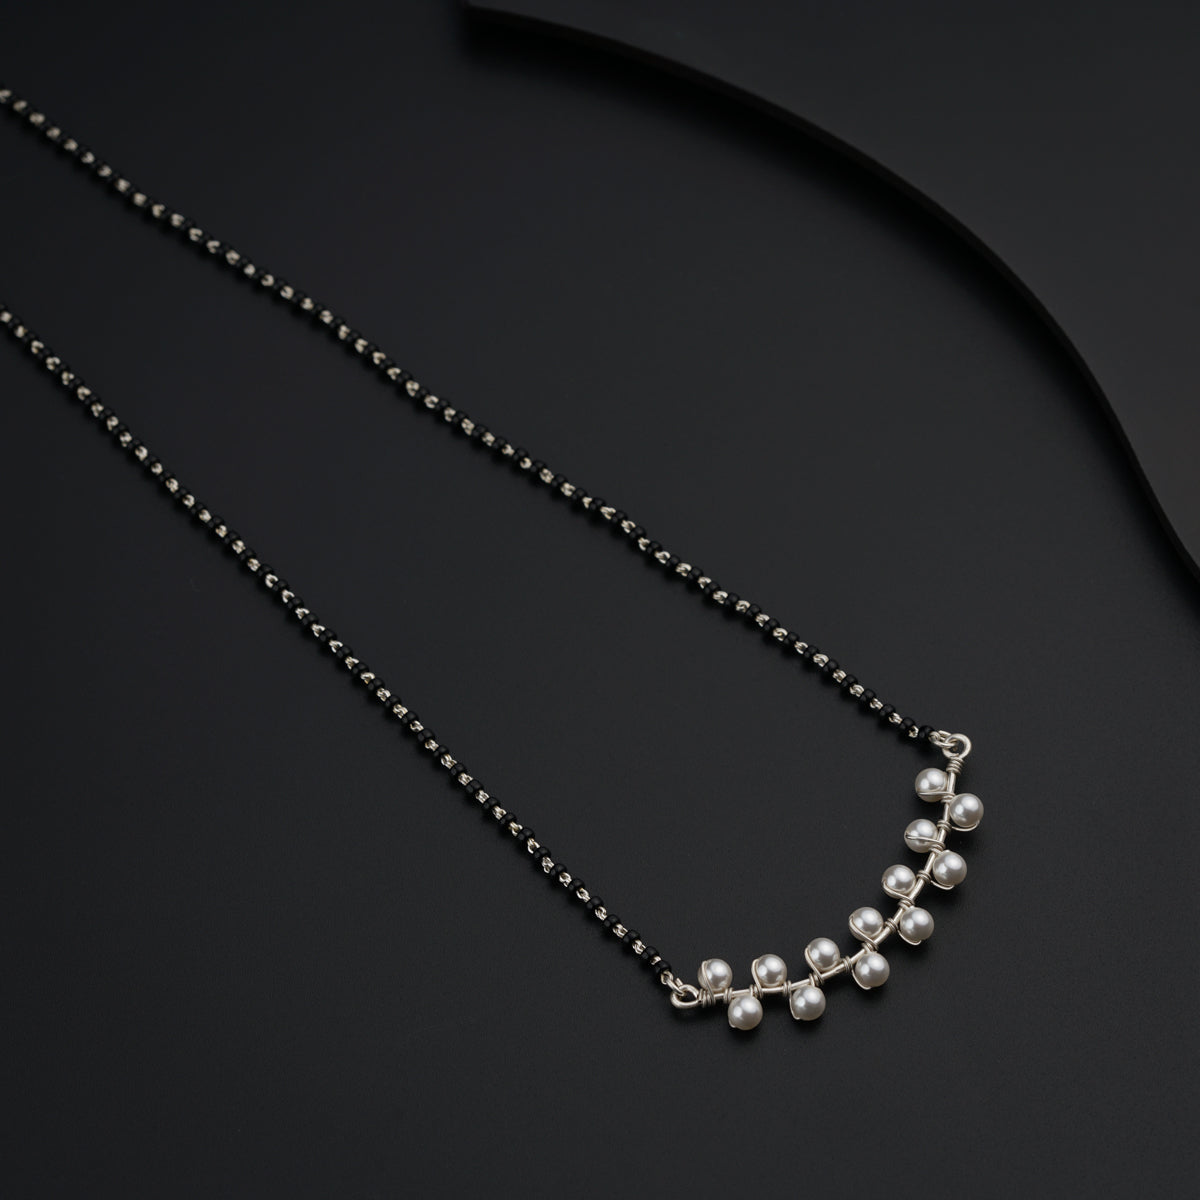 a necklace with pearls on a black surface